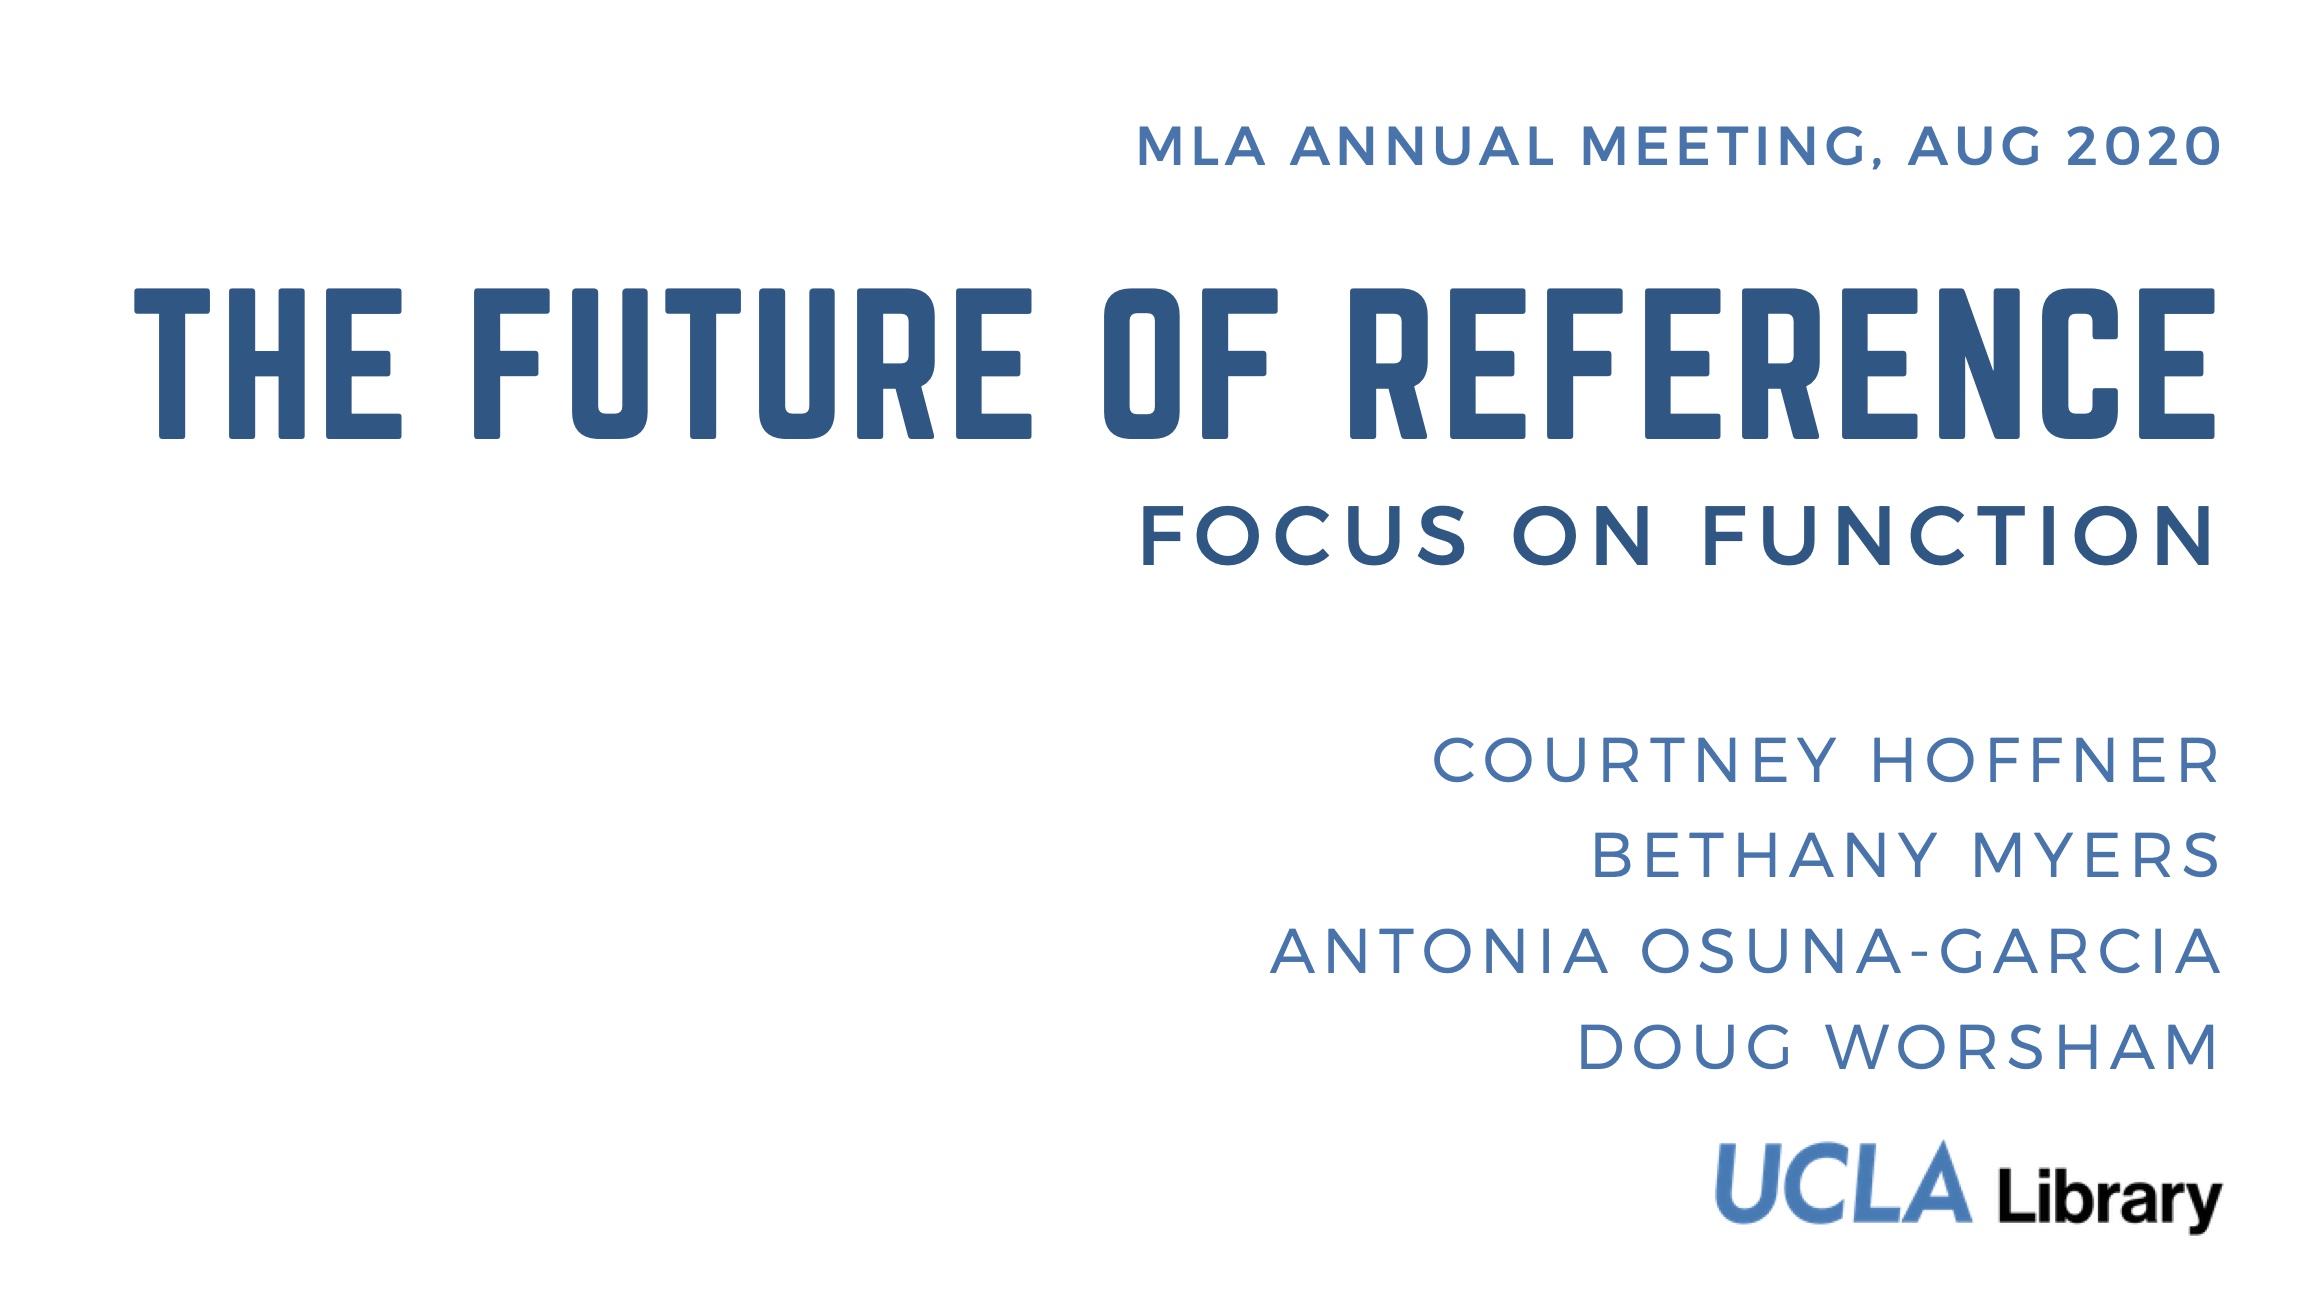 The Future of Reference: Focus on Function at the MLA Annual Conference